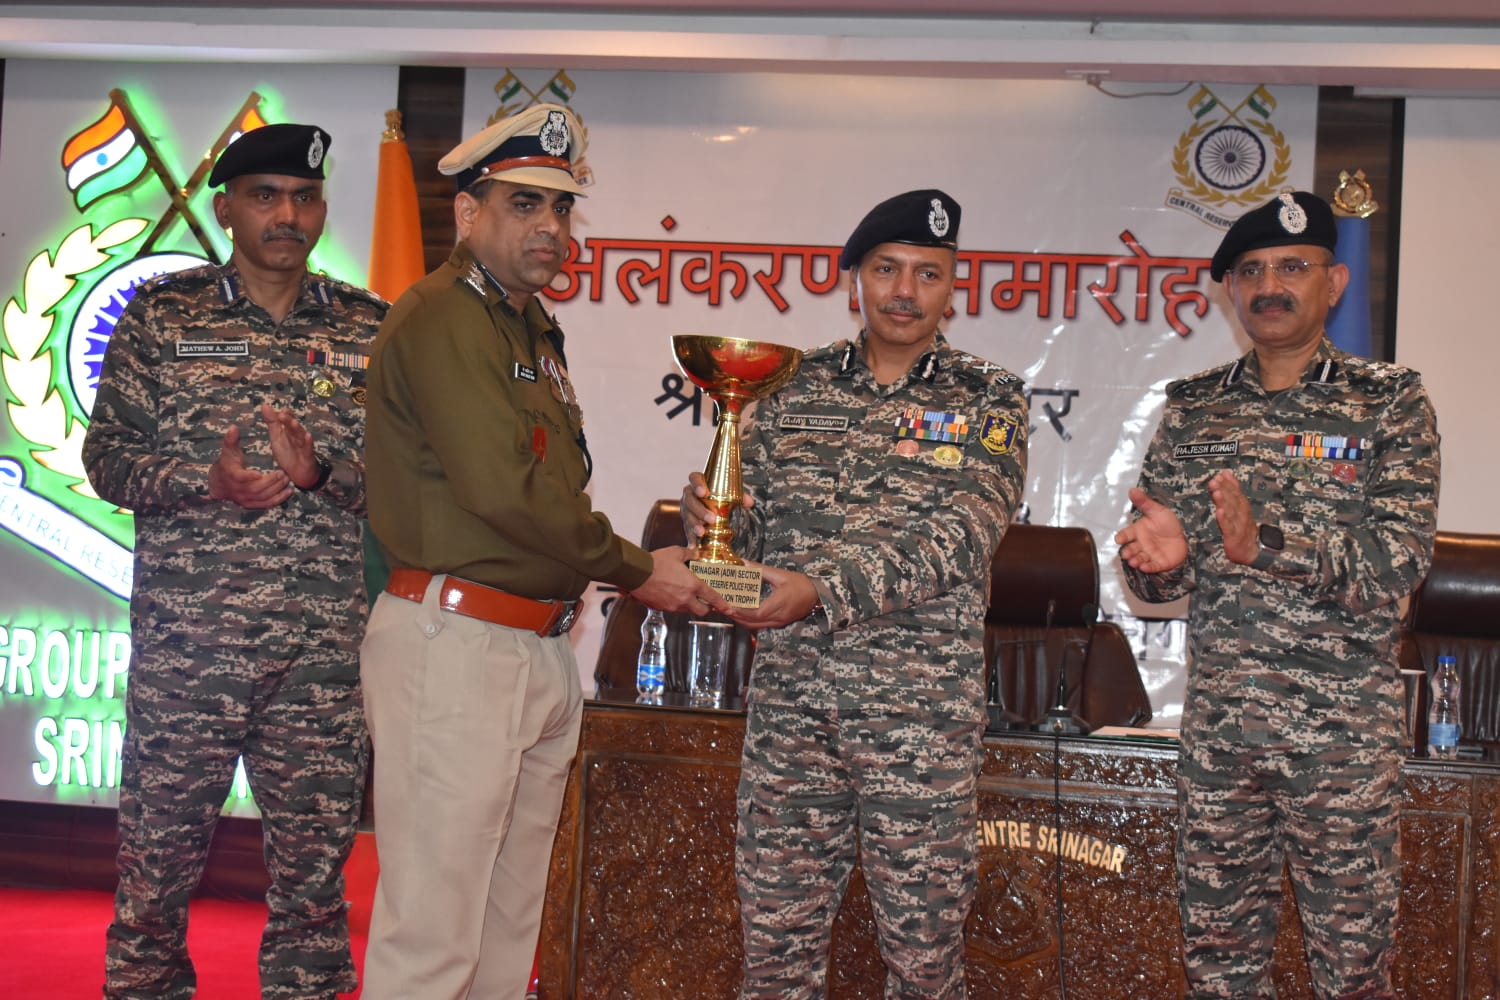 https://www.hindi.awazthevoice.in/upload/news/170125023401_CRPF_Commandant_of_Mewat_Mohammad_Khalid_received_Home_Minister_Special_Operation_Medal_2.jfif